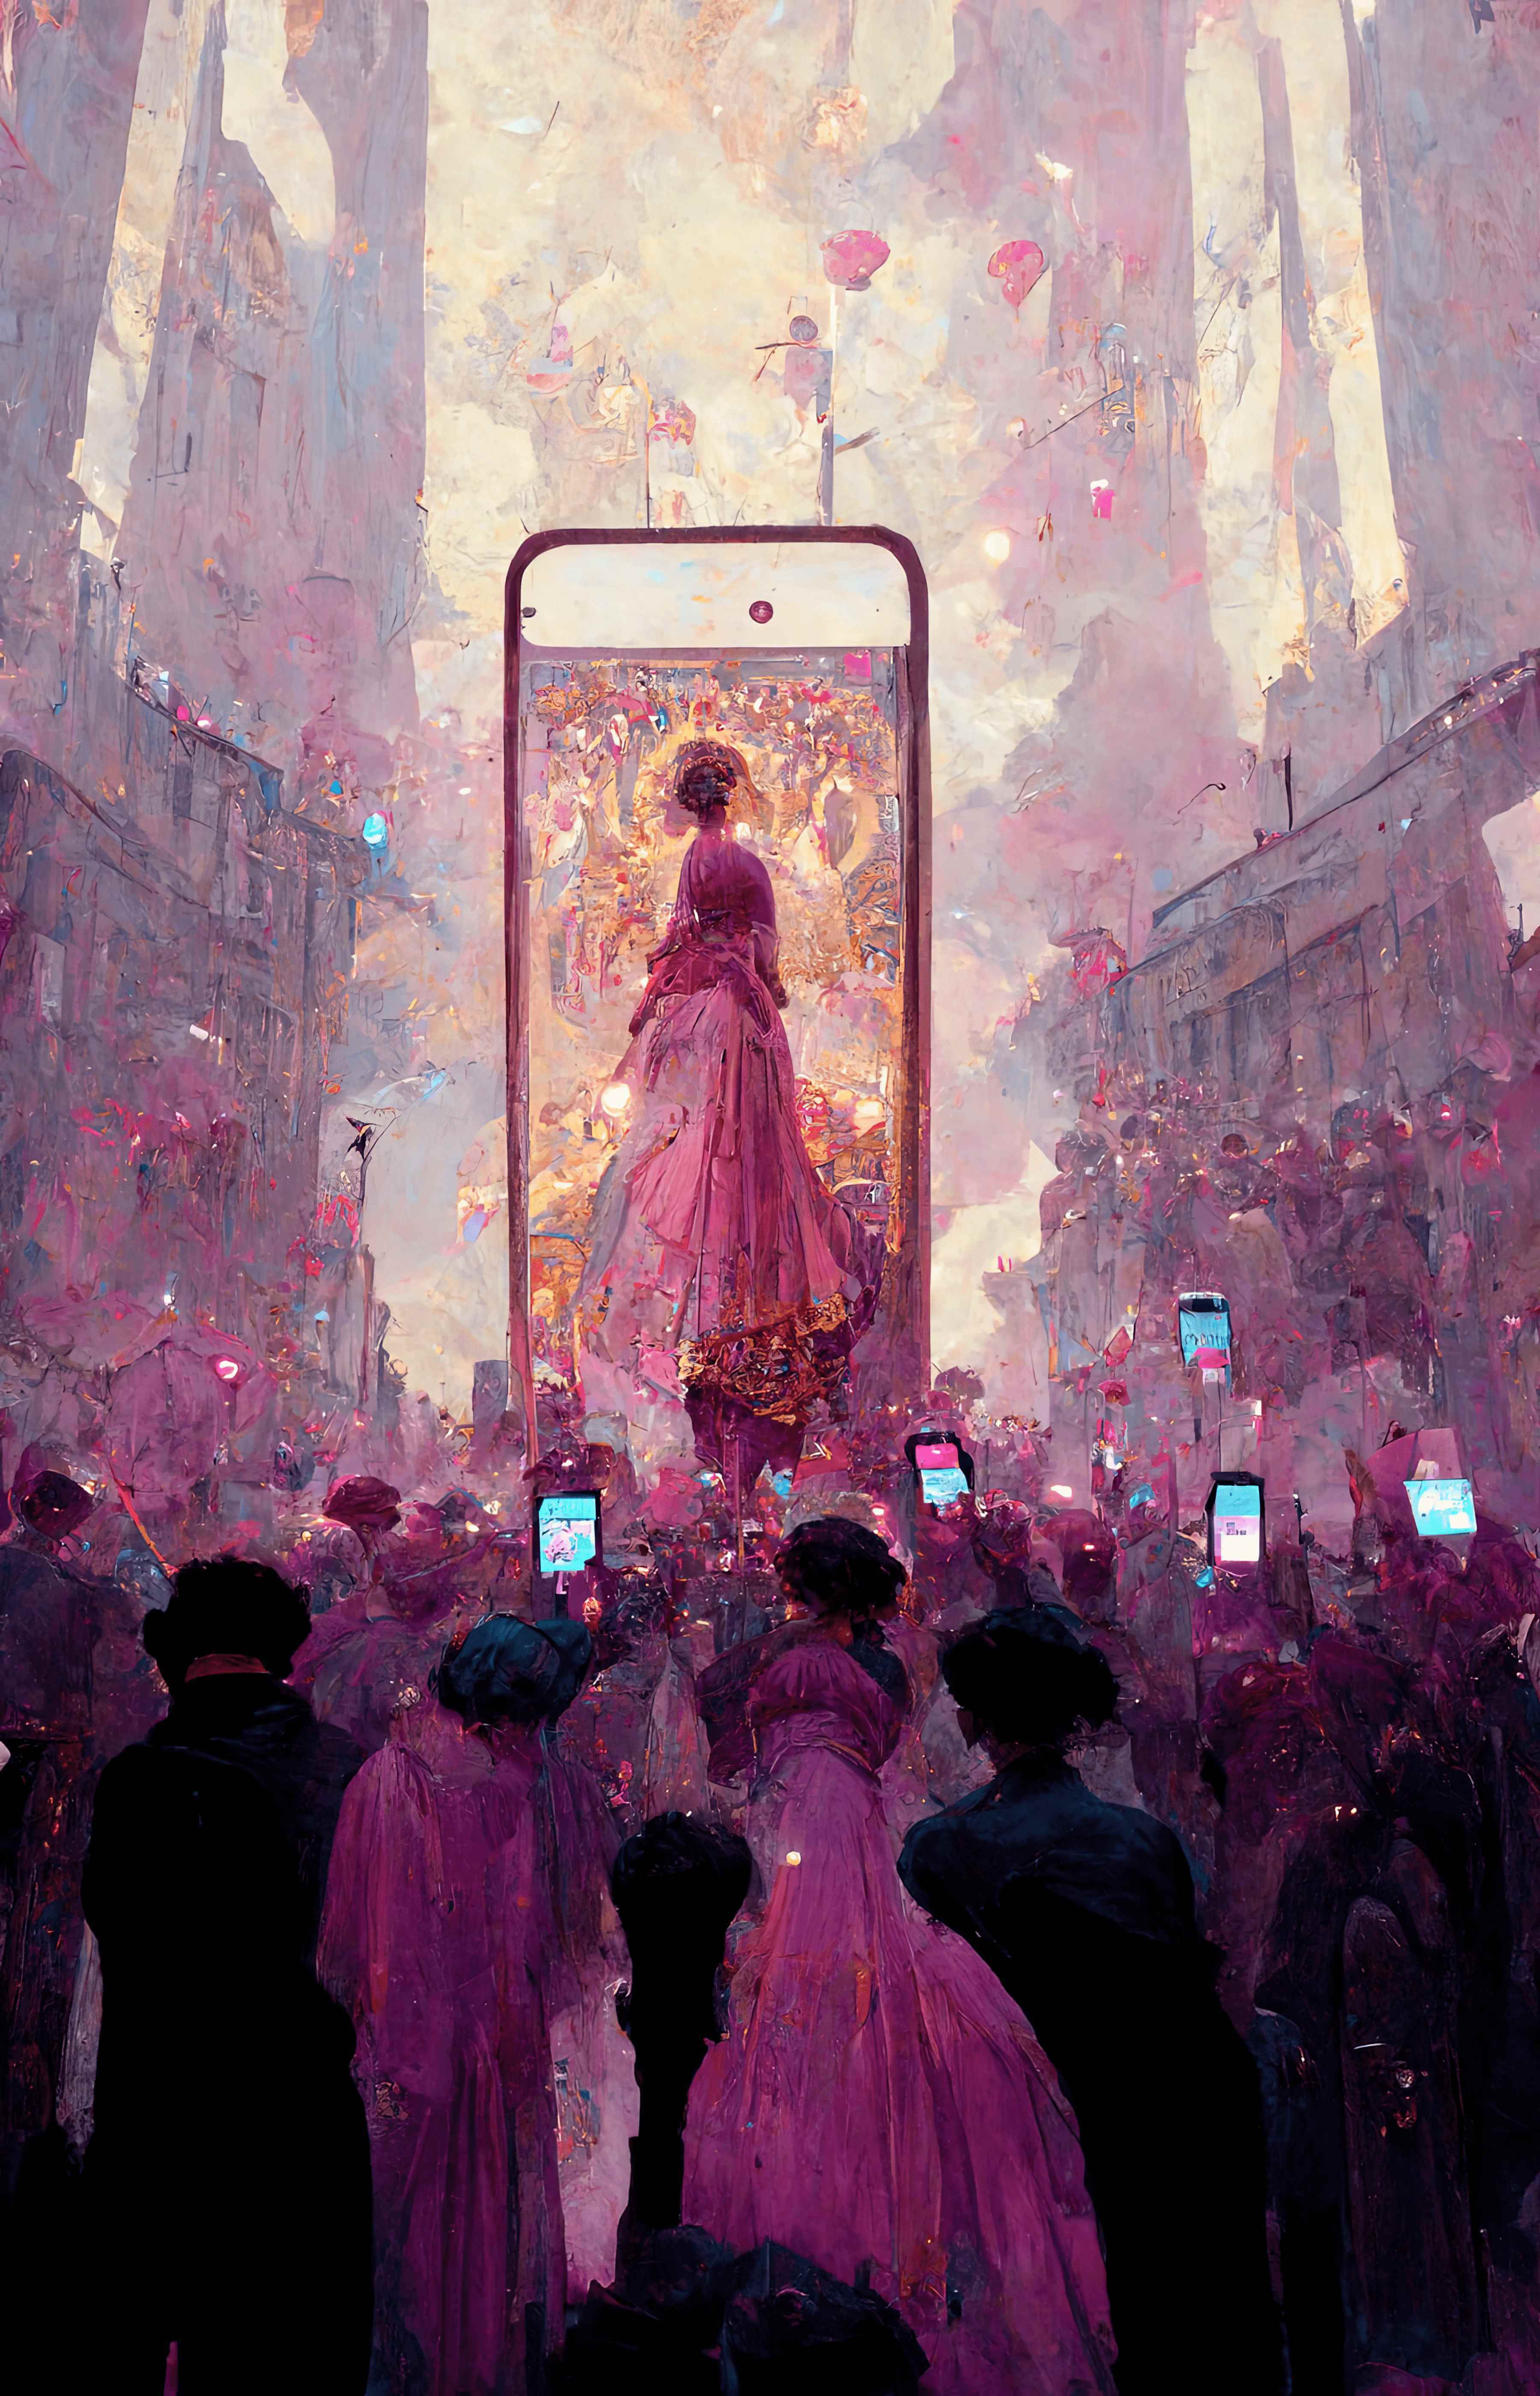 A painterly illustration of a crowd gathered in the streets to view a towering smartphone. On the phone is a person in a turn-of-the-century gown flowing in magenta, who is facing away from the crowd. We see the glow of blue smartphone screens as the crowd raises their phones to record what's going on. Tall buildings frame the center—dark blue, purple, and magenta frame the bottom. A light cream and pink glow come from clouds in the sky as rose petals fall around. 